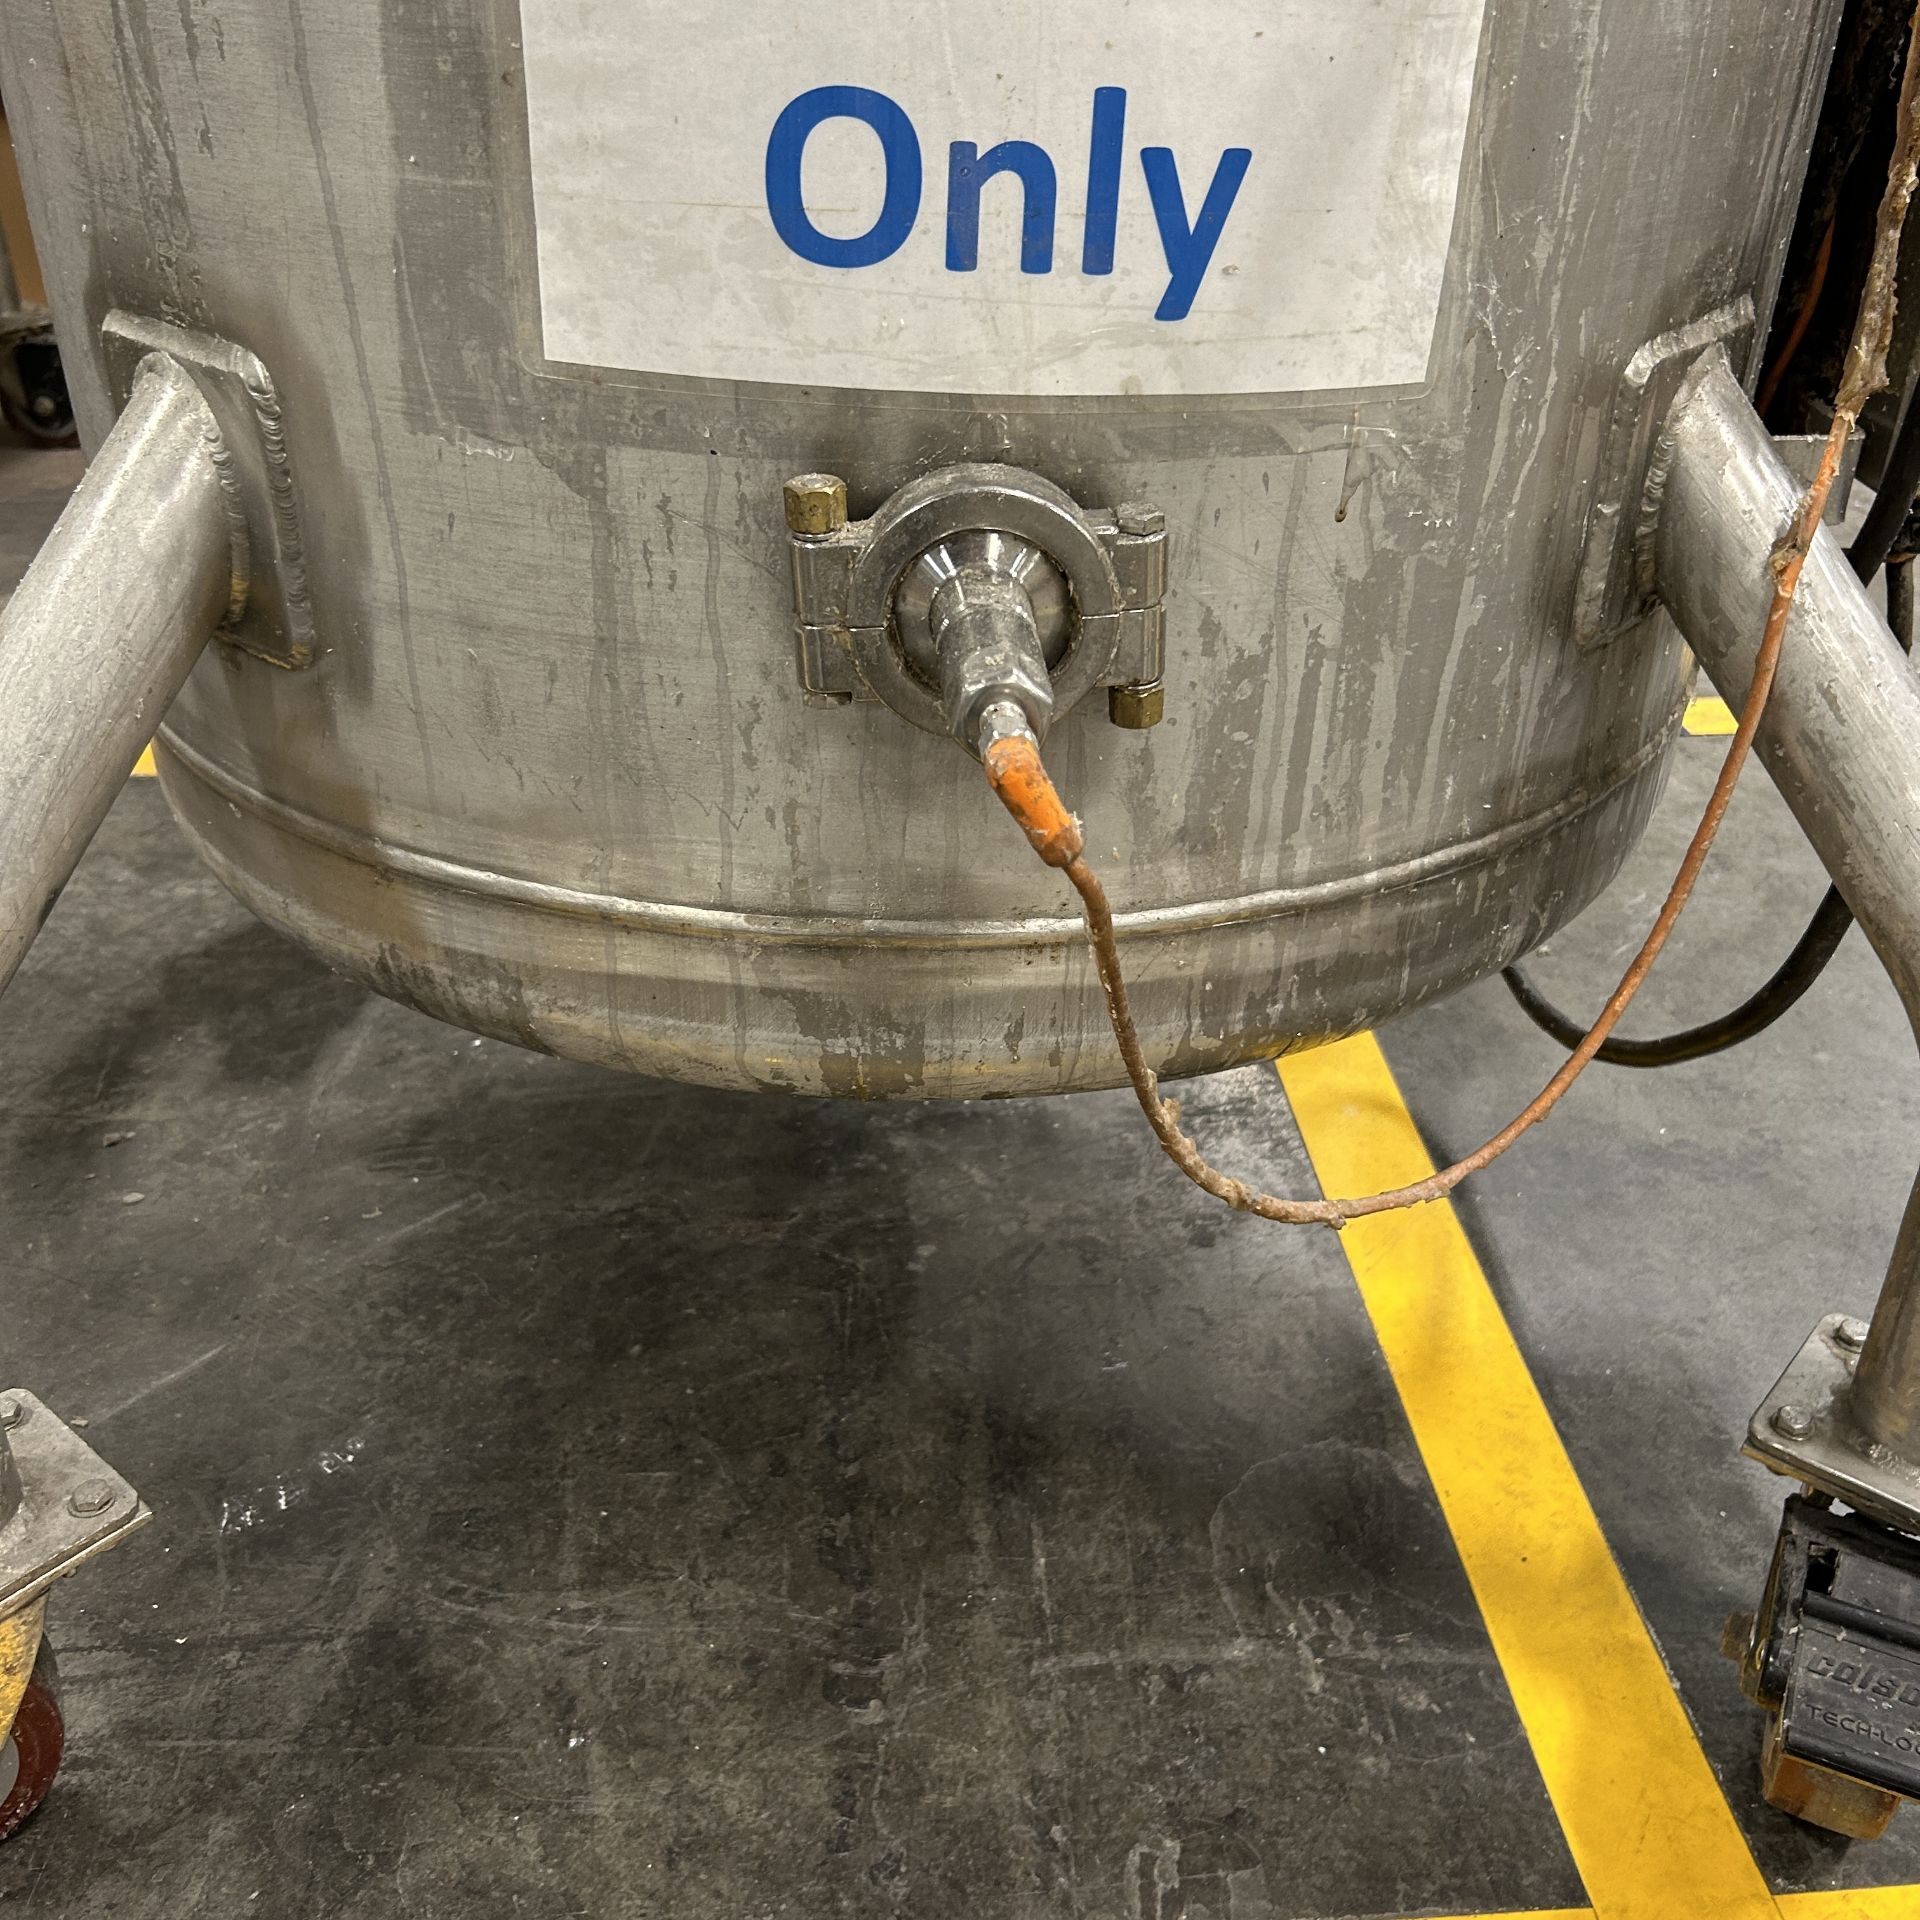 2019 Amherst Stainless Steel Agitation Pressure Pot - Image 7 of 12